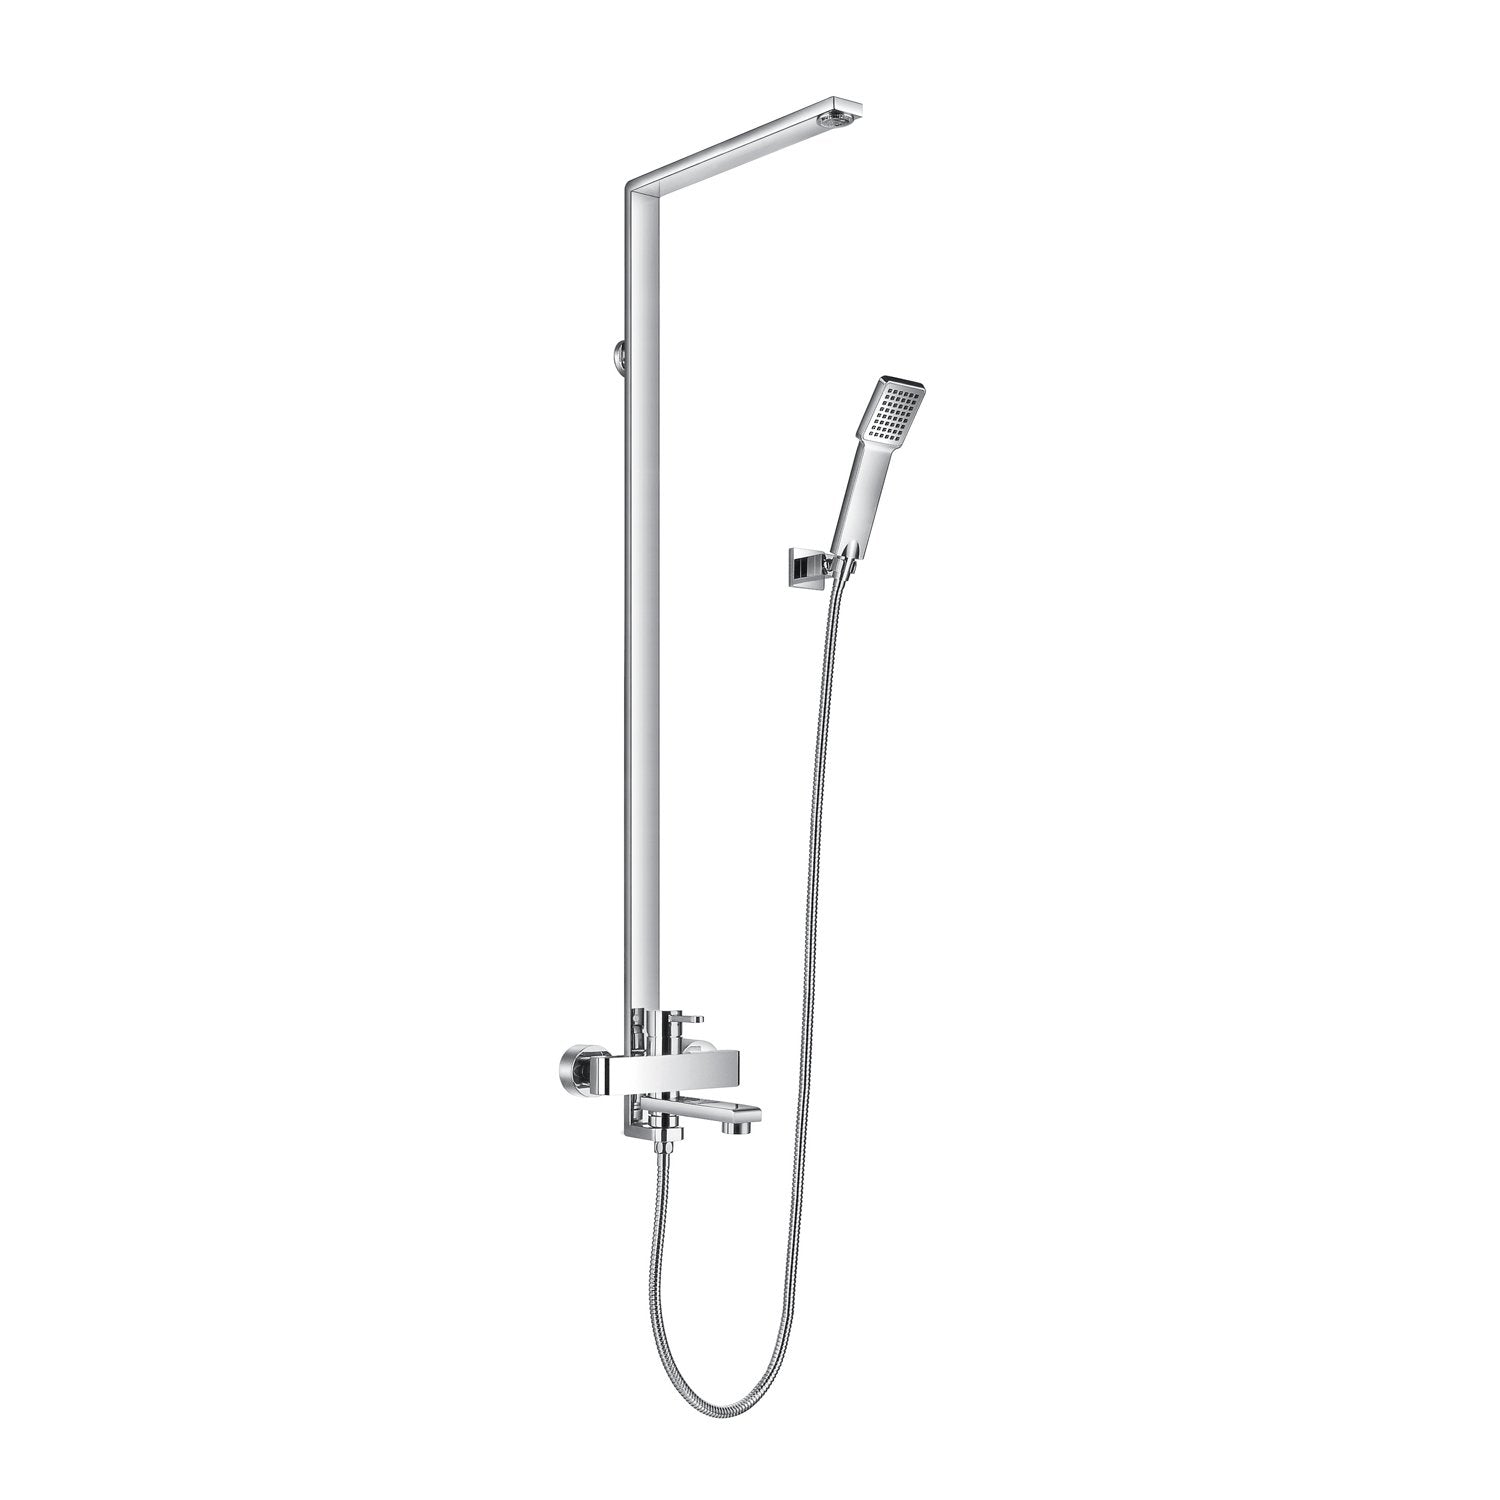 DAX Shower System, Faucet Set, with Shower Tub Trim and Hand Shower, Wall Mount, Brass Body, Chrome Finish (DAX-8166C-CR)